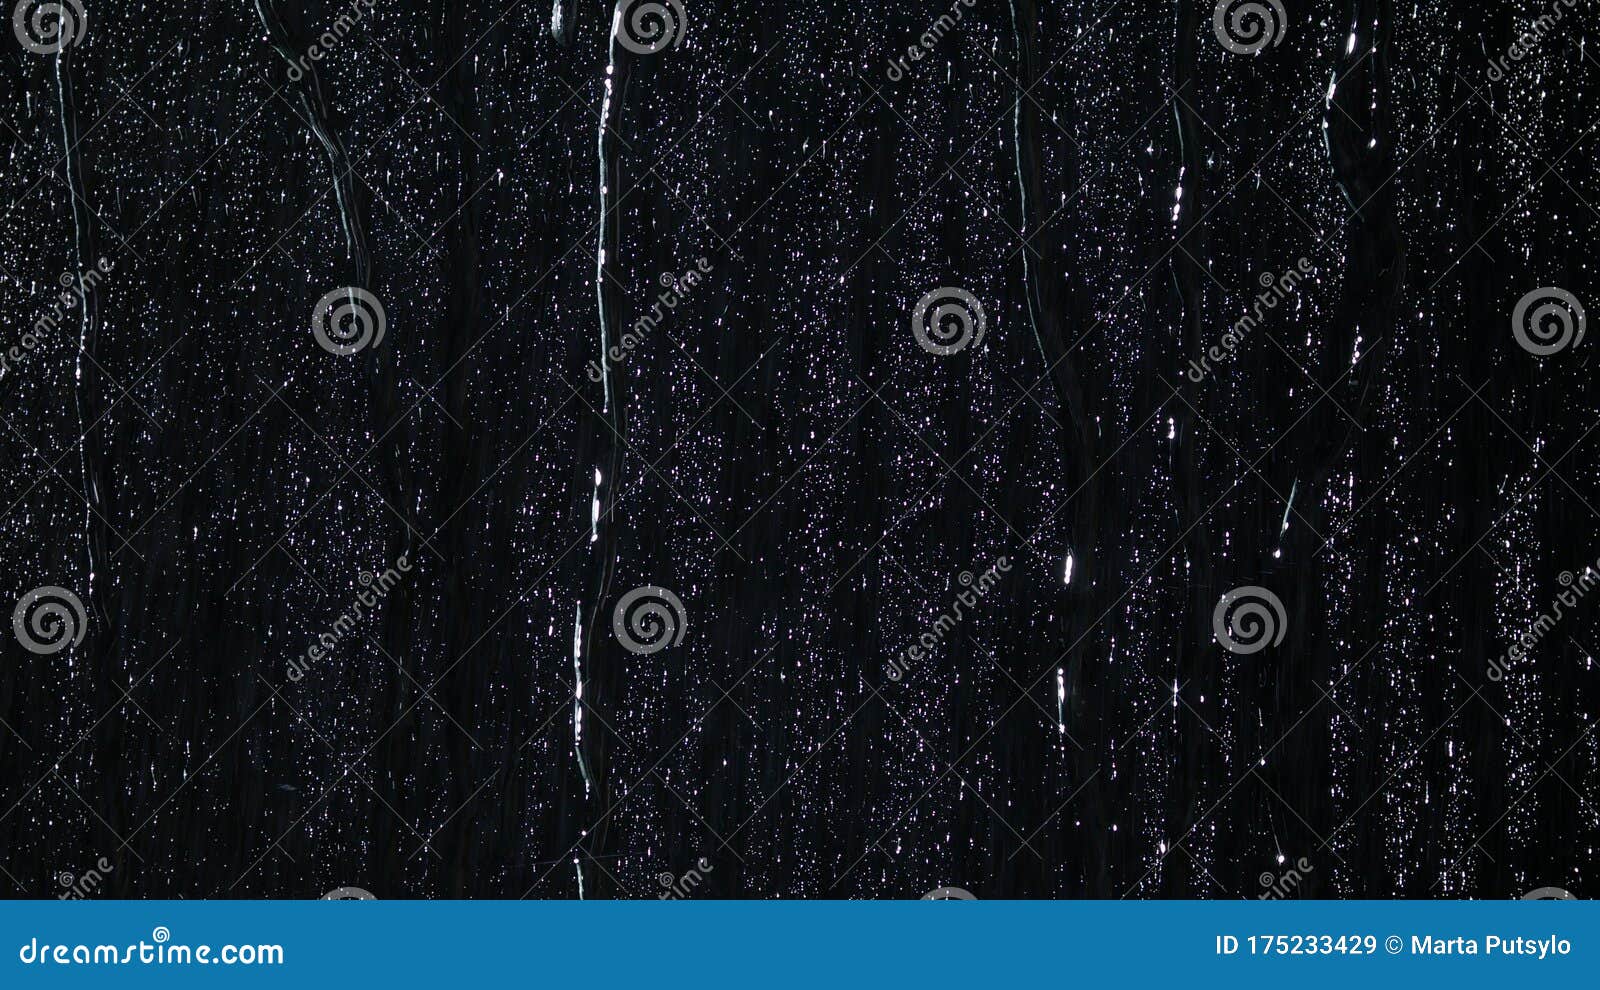 droplets of water on black glass running down.